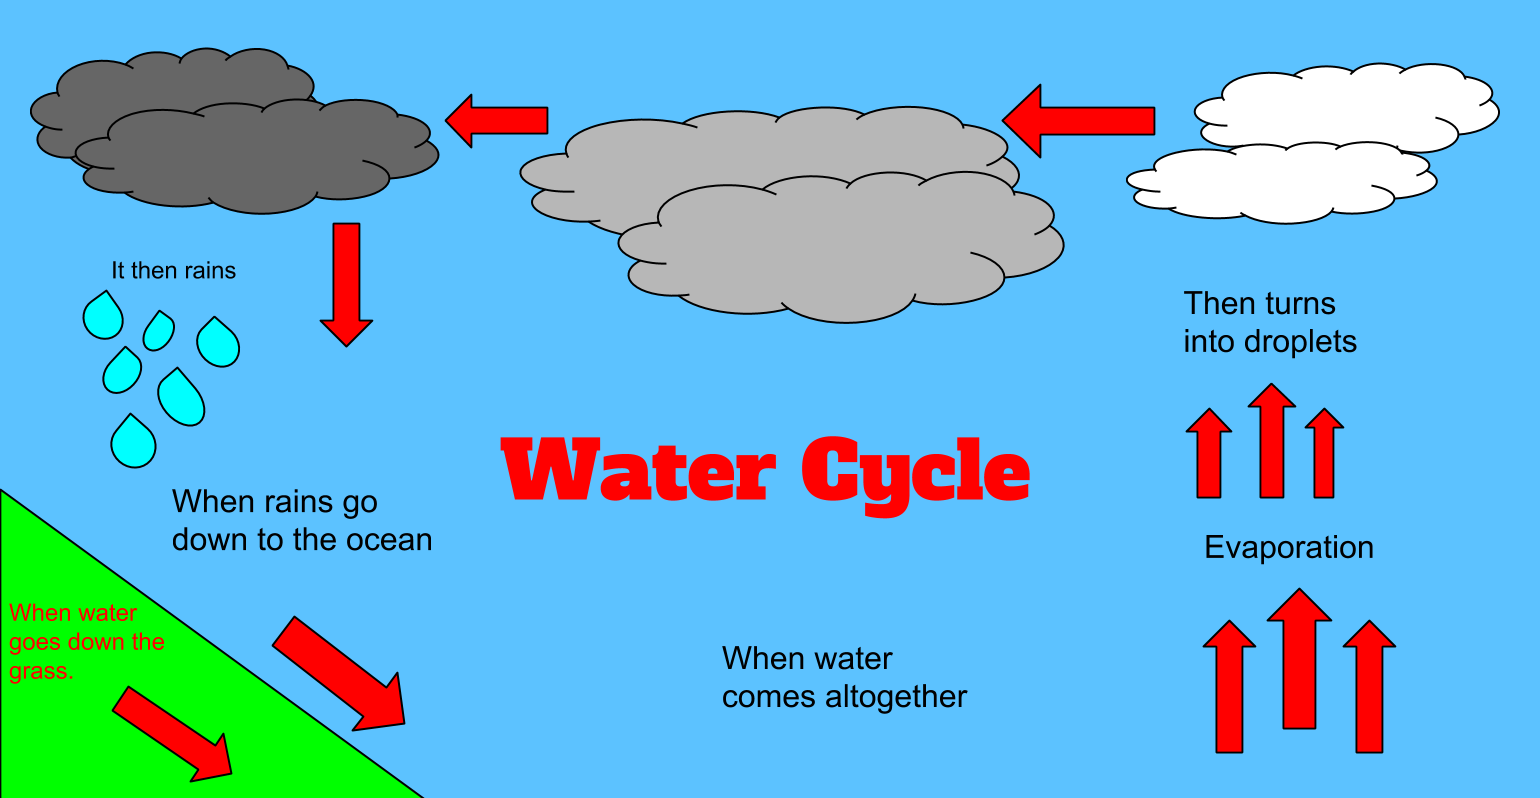 Water Cycle Image (1).png